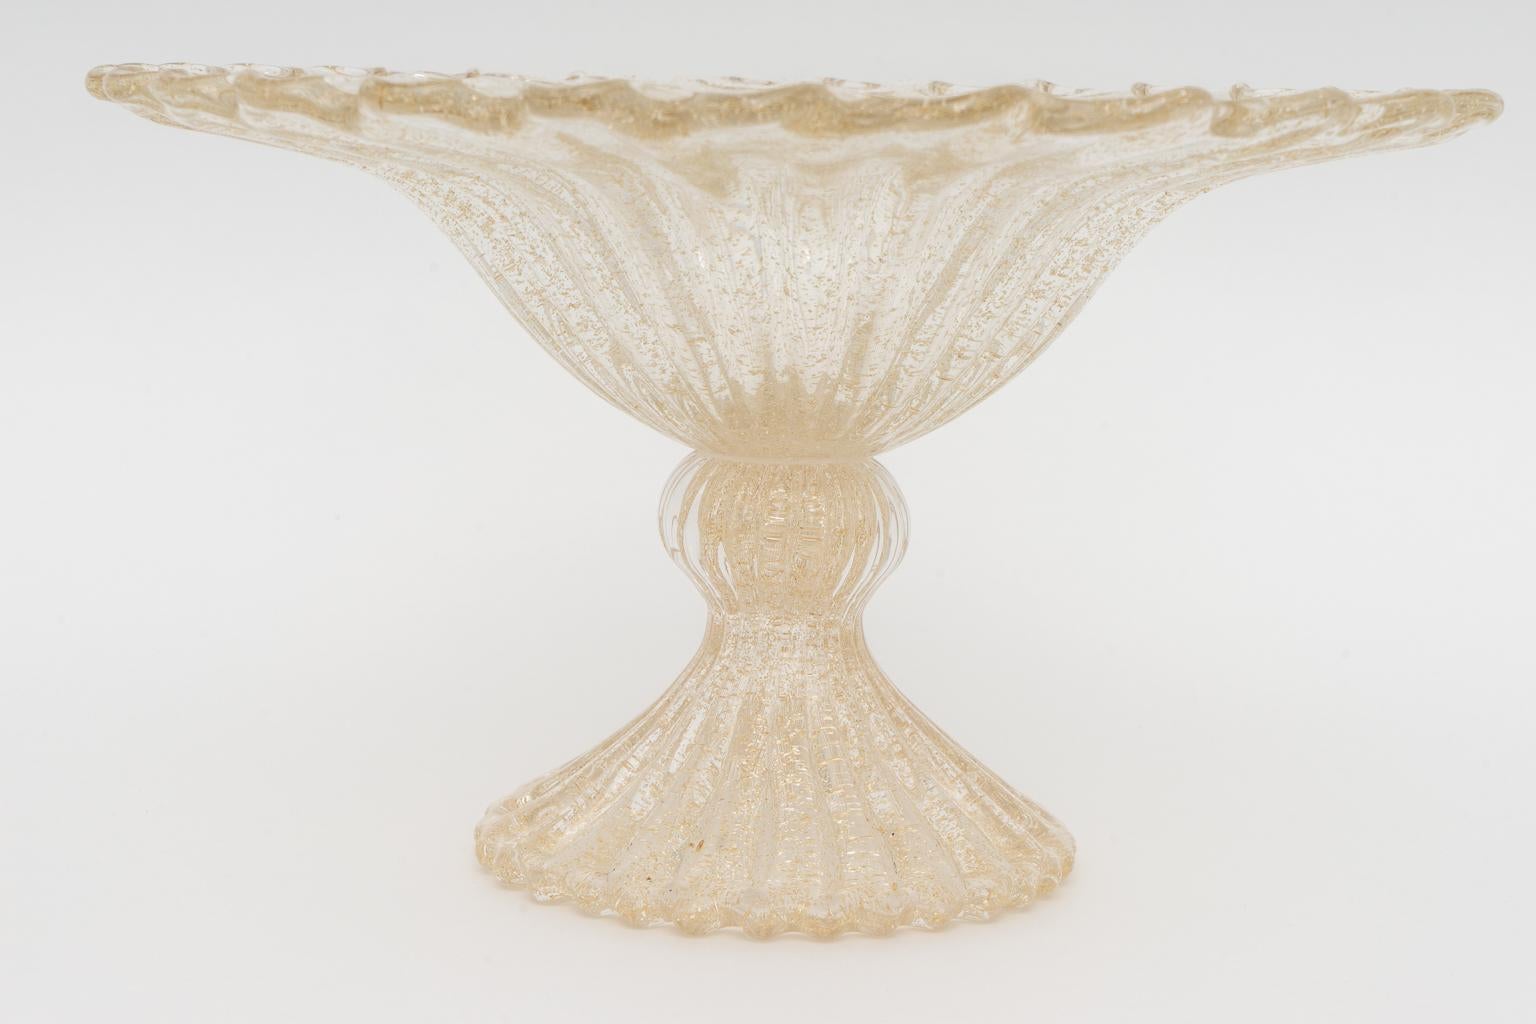 This stylish Murano glass compote was acquired from a Palm Beach estate and is in the style of pieces created by Barovier et Toso and it could be used for a floral arrangement, to hold fruits and simply as an object of beauty.